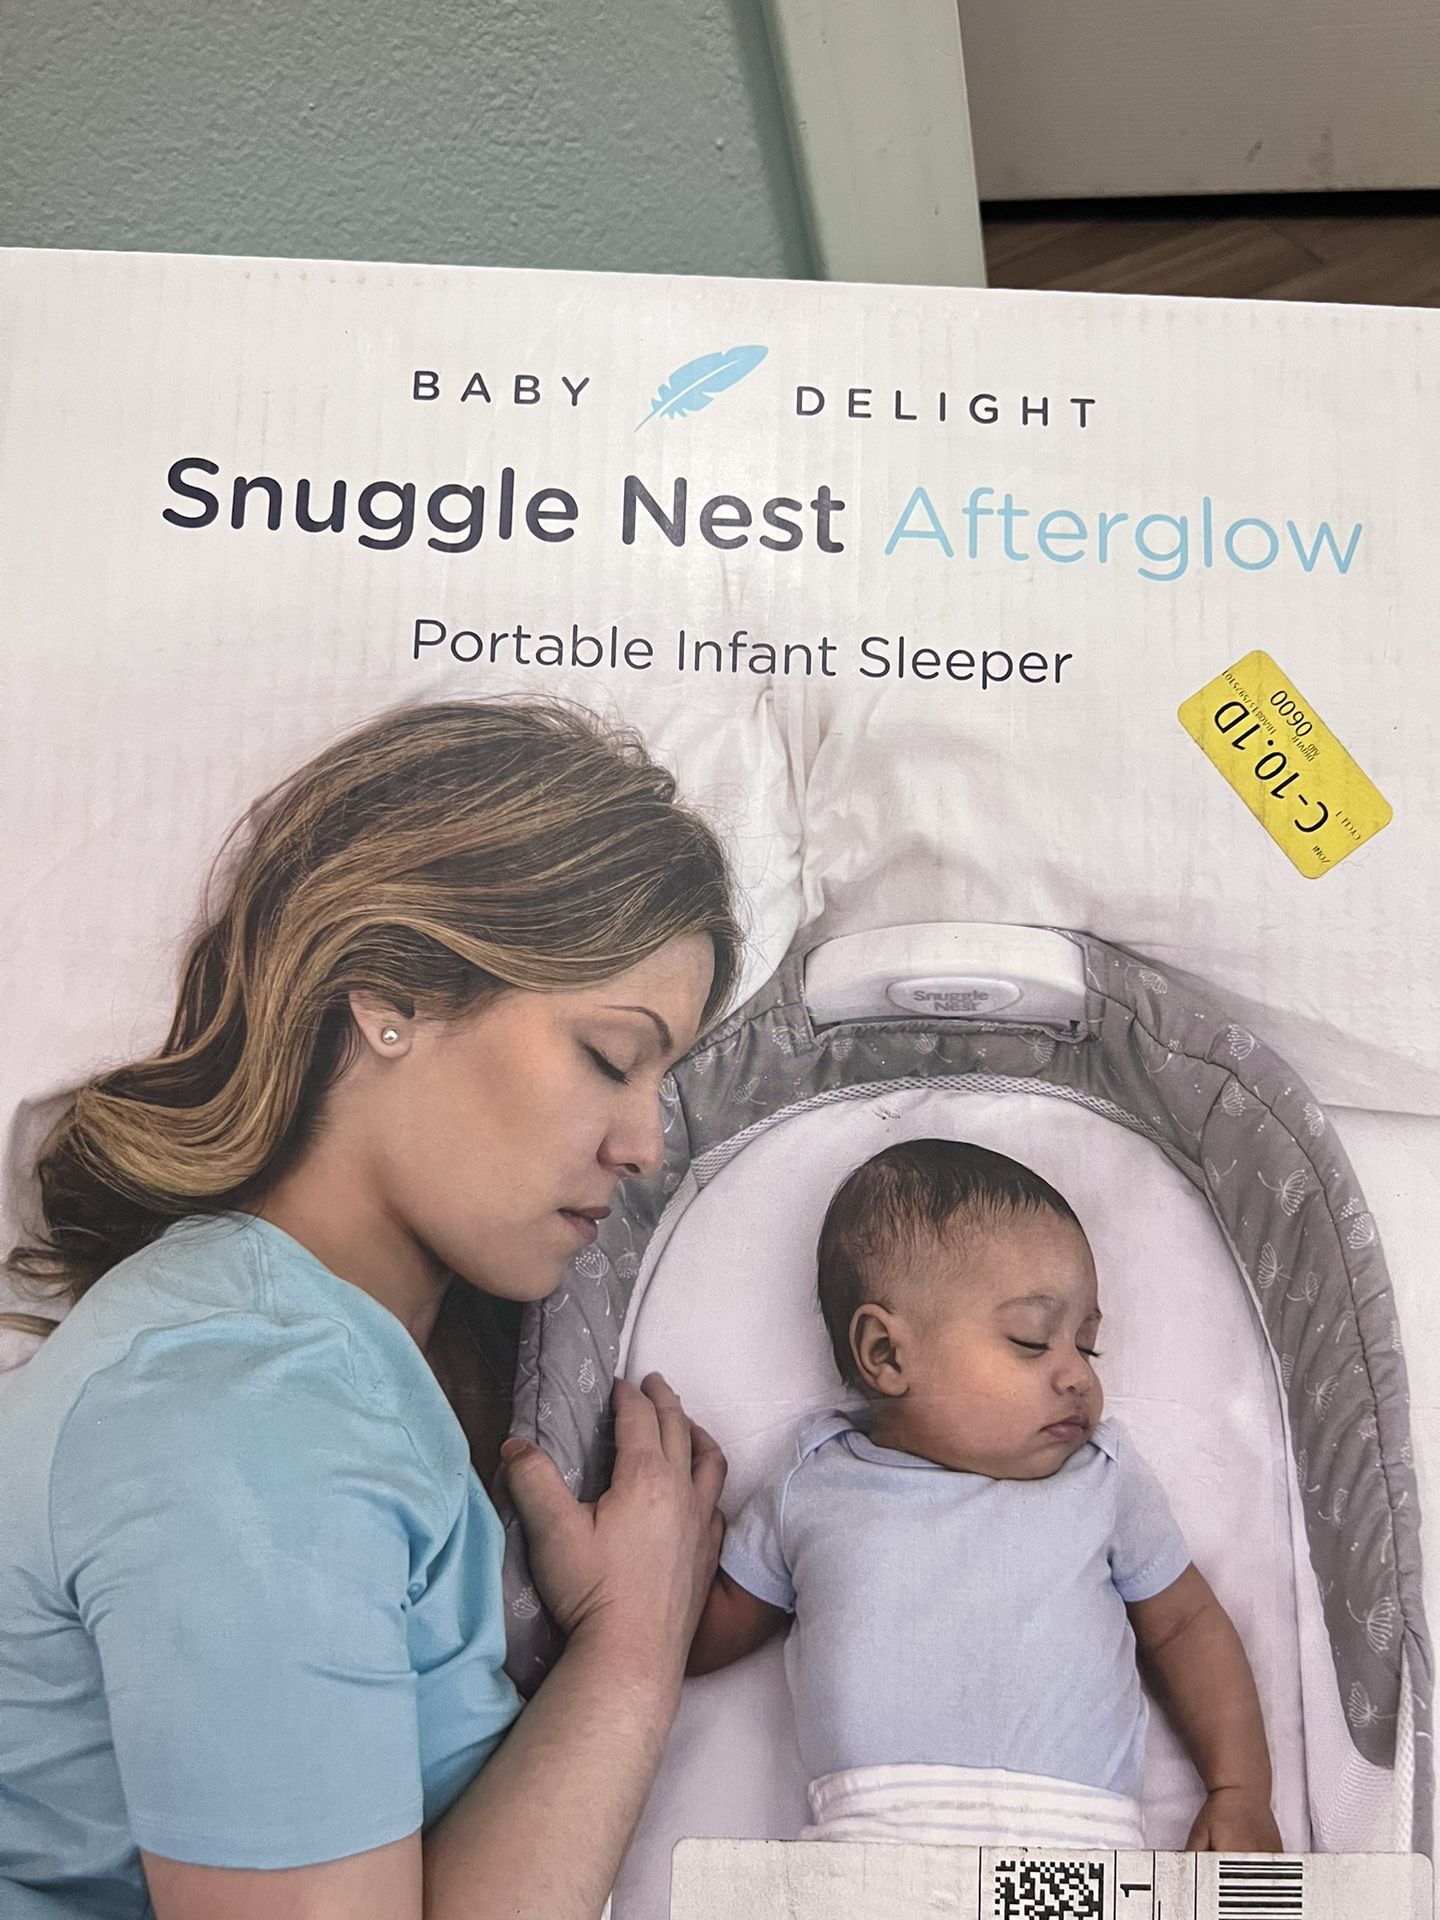 Portable Infant Sleeper, Baby Bassinet, Baby Portable Bassinet, Snuggle Nest Afterglow, Portable Bassinet, Baby Delight, 